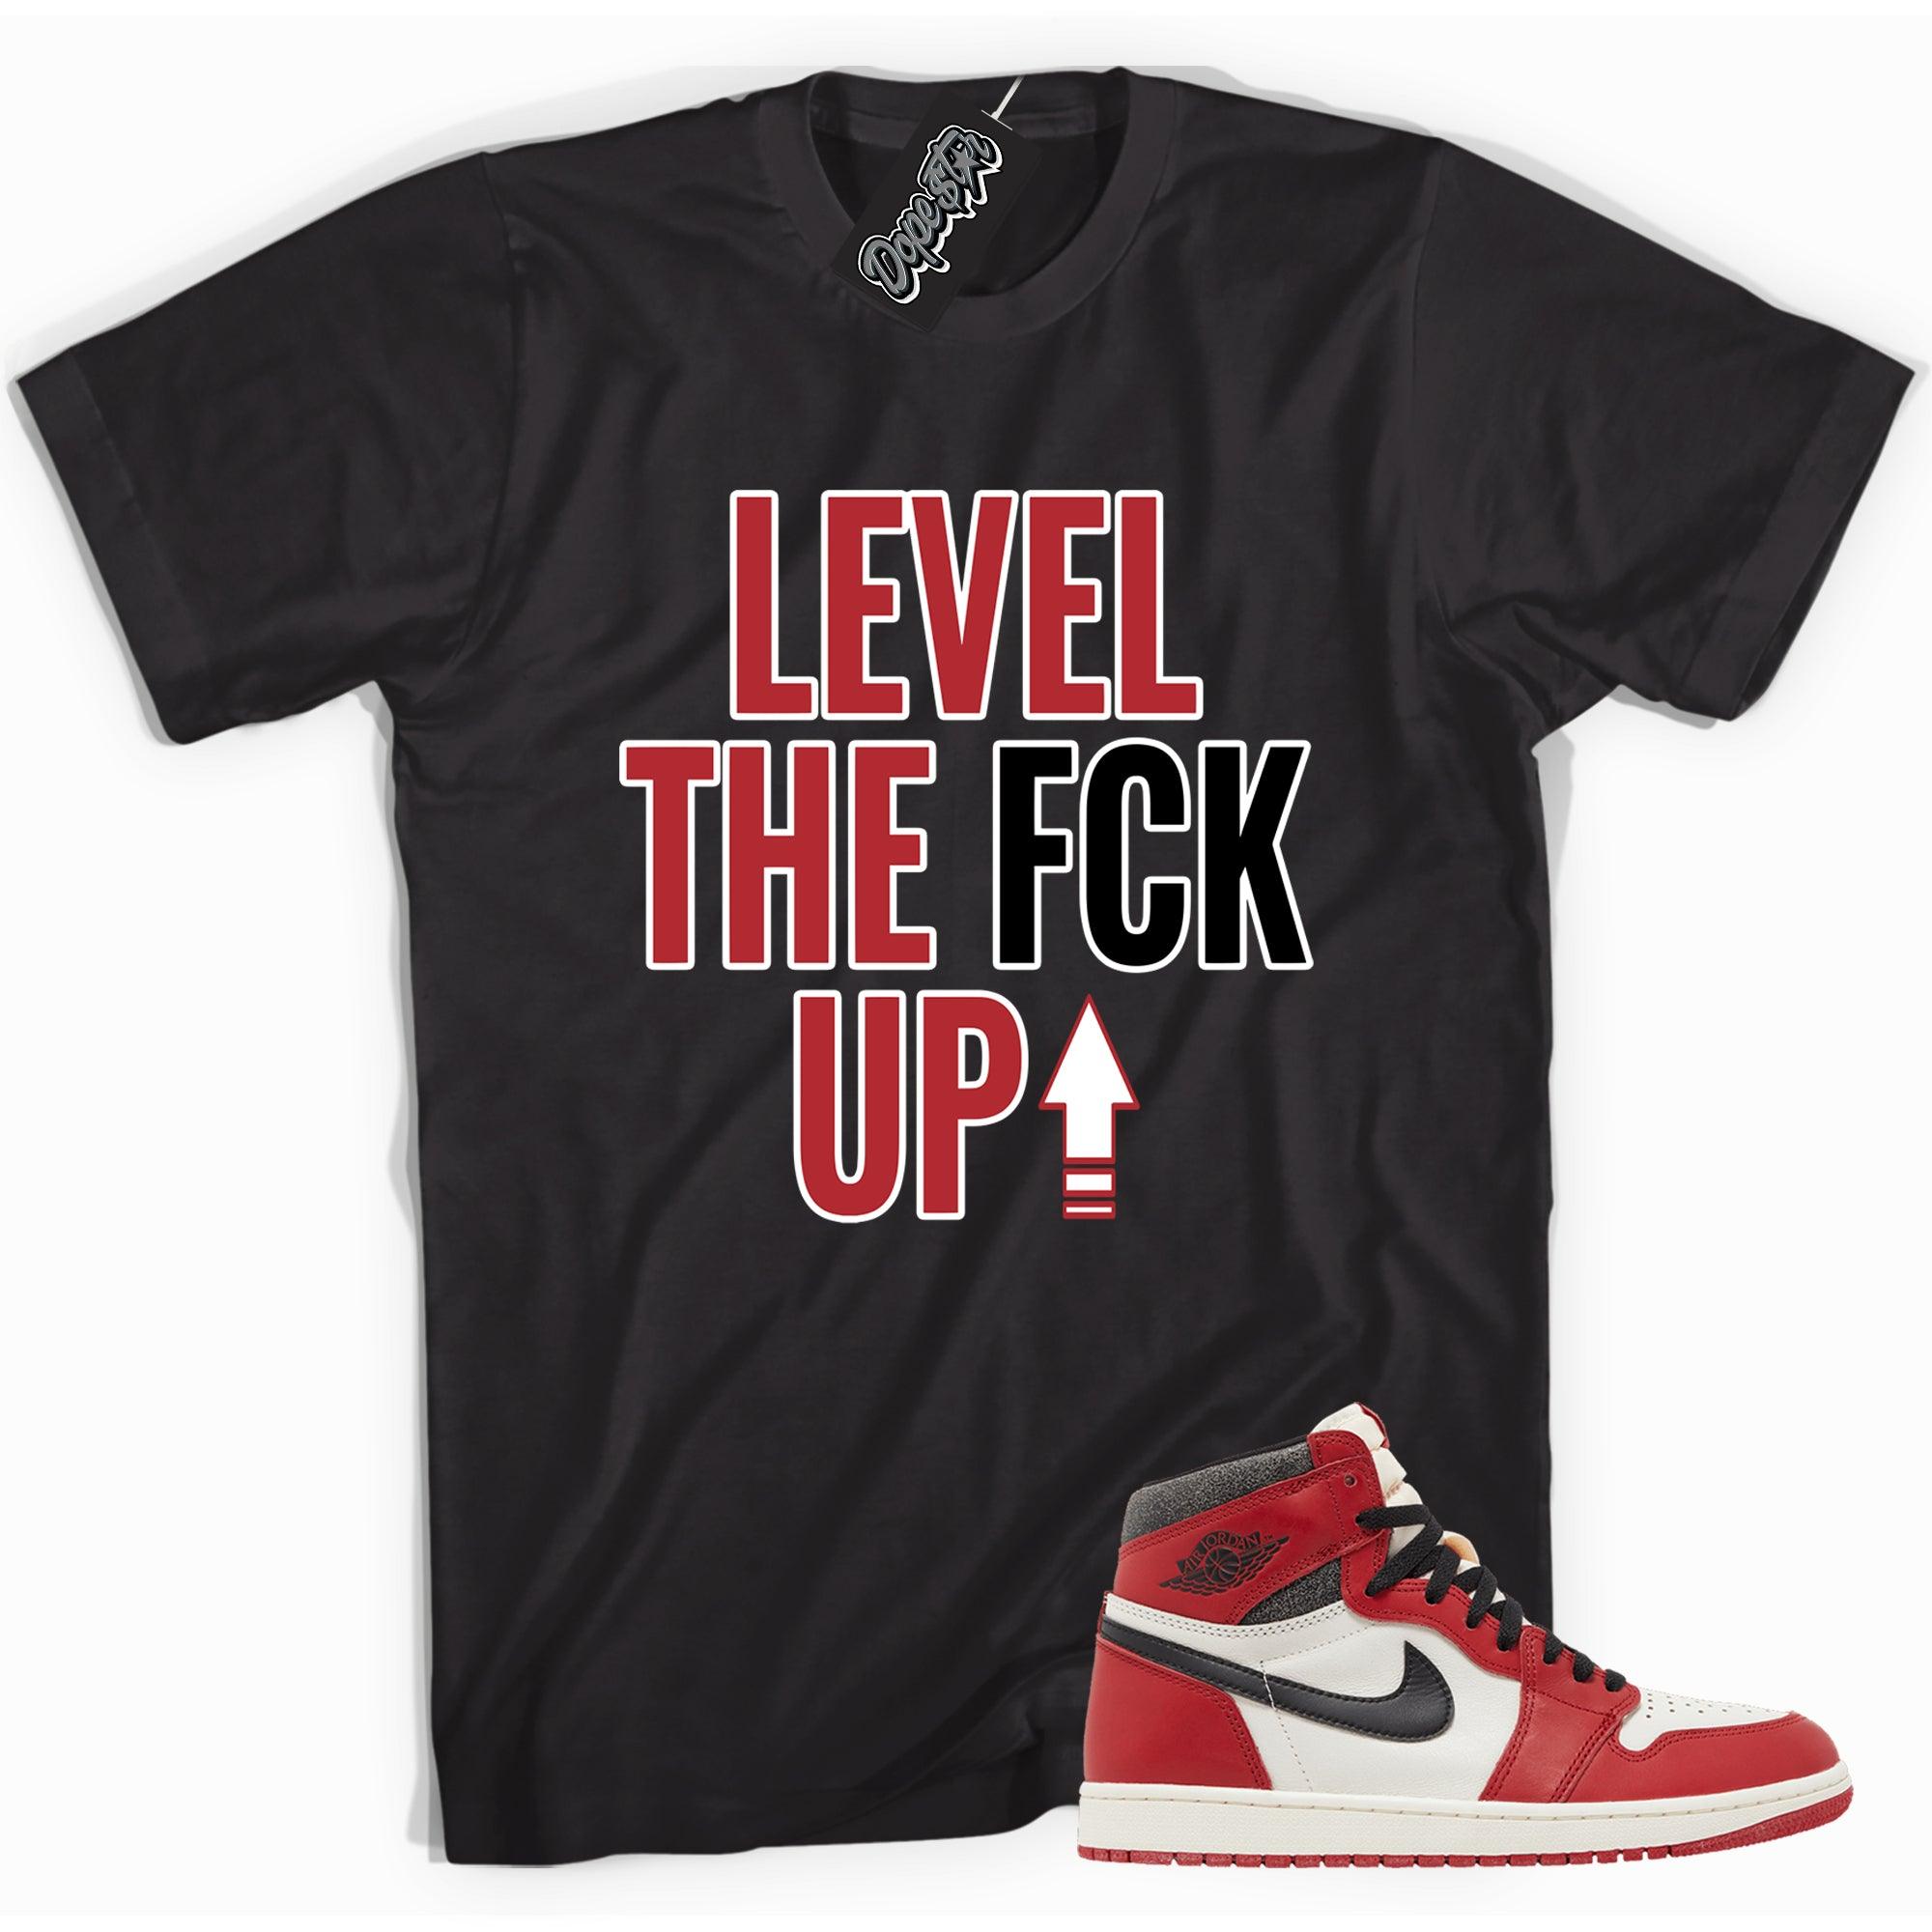 Cool black graphic tee with 'Level Up' print, that perfectly matches Air Jordan 1 Retro High OG Lost and Found sneakers.